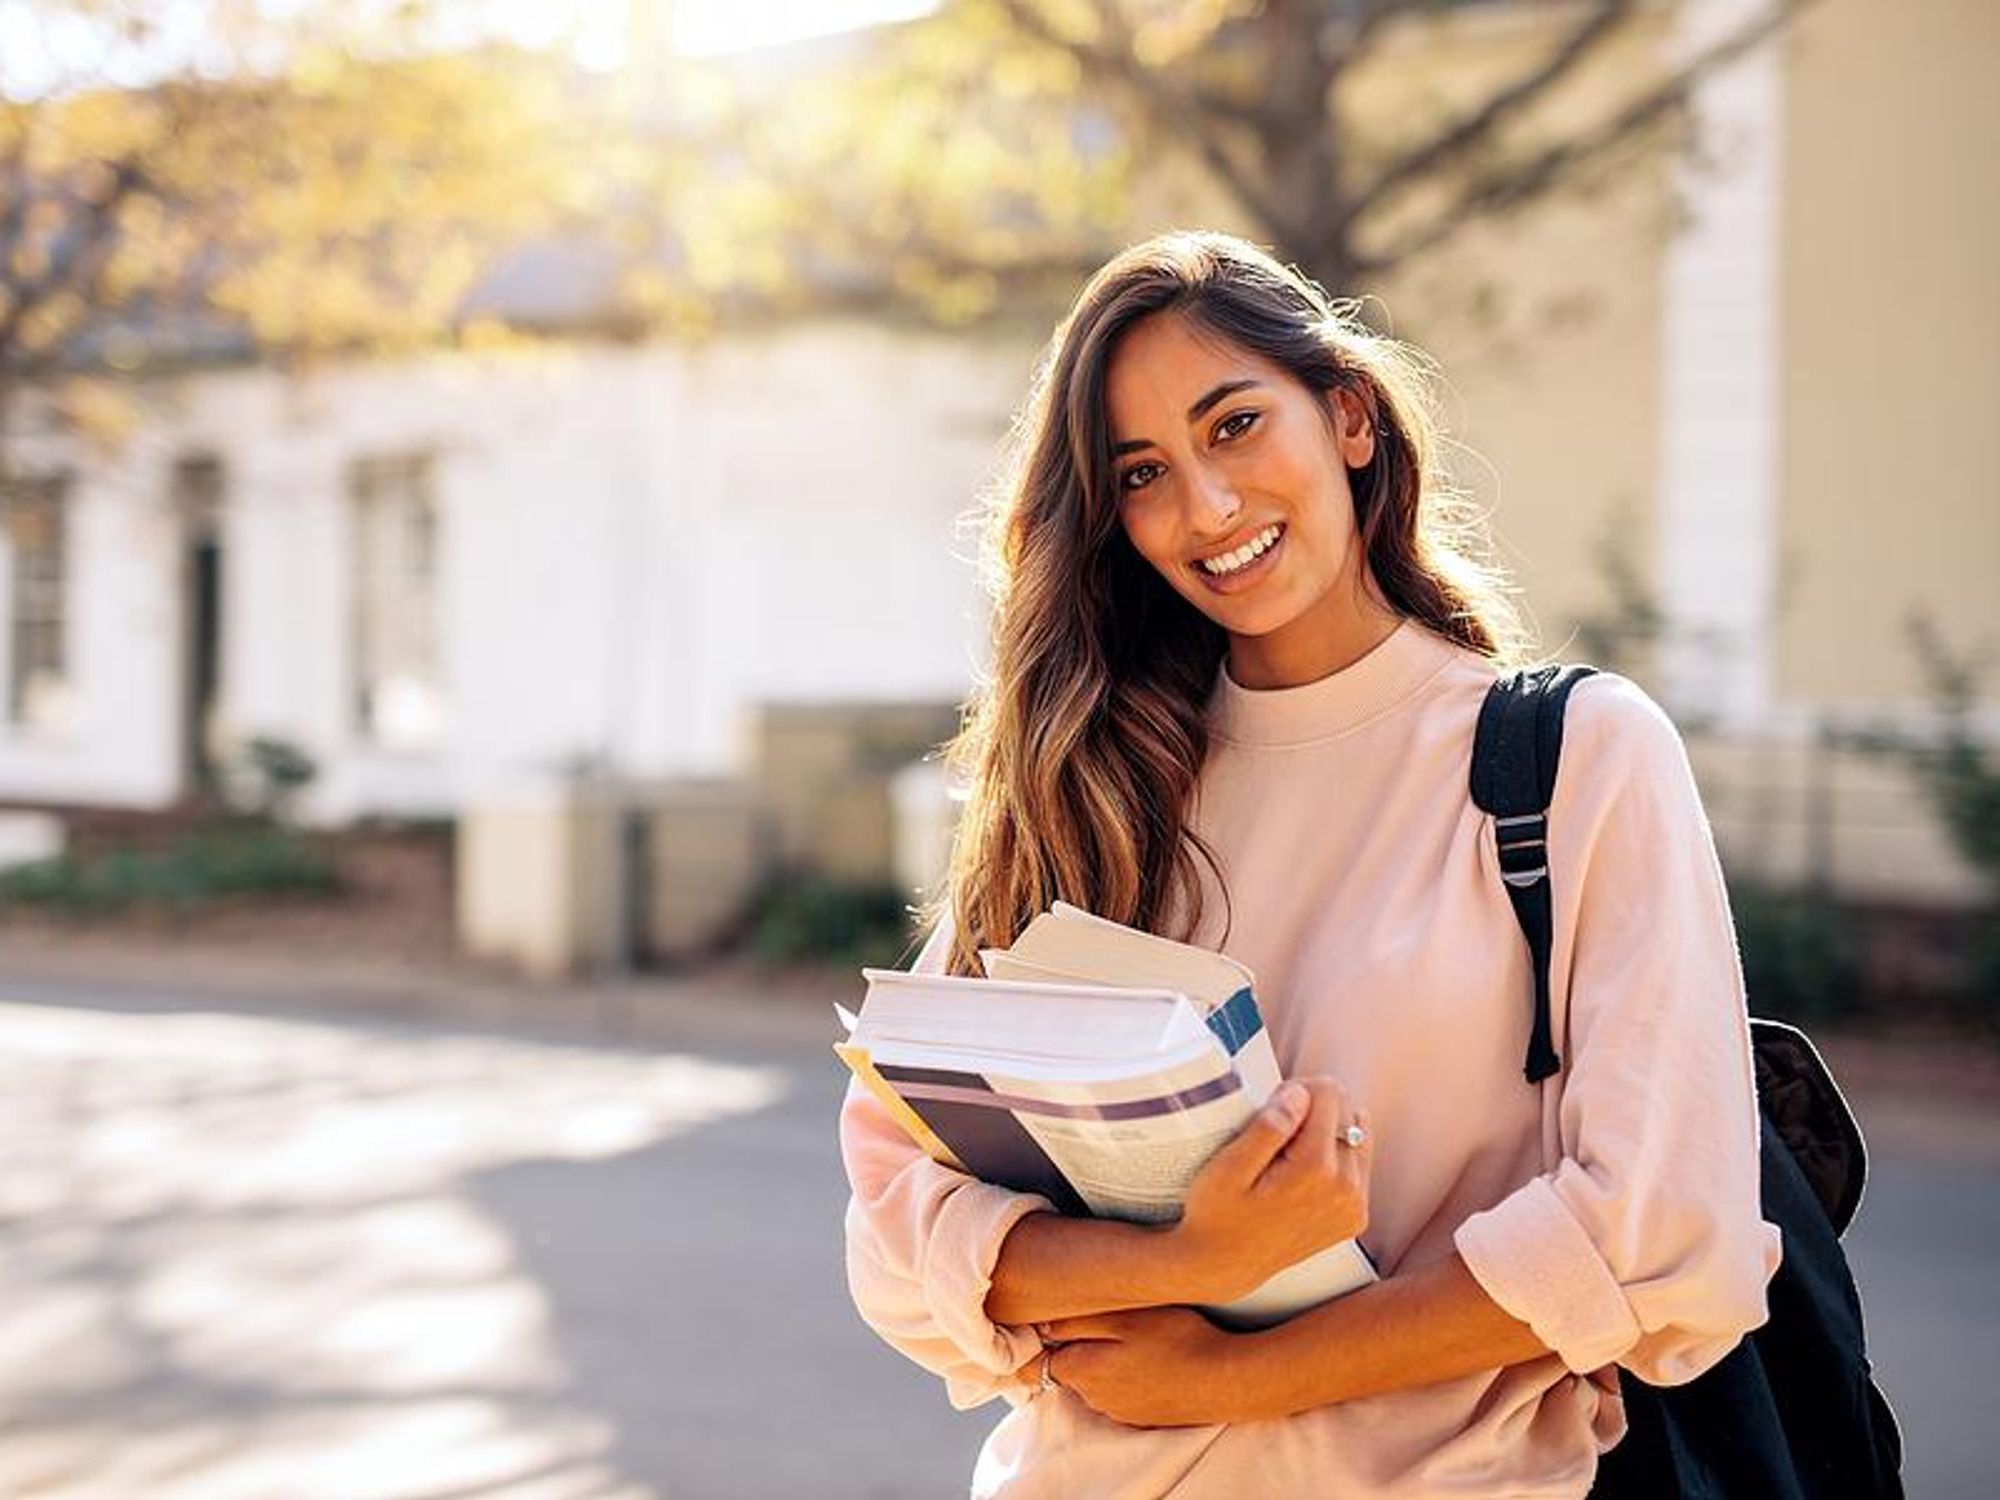 College student carries books to her classes